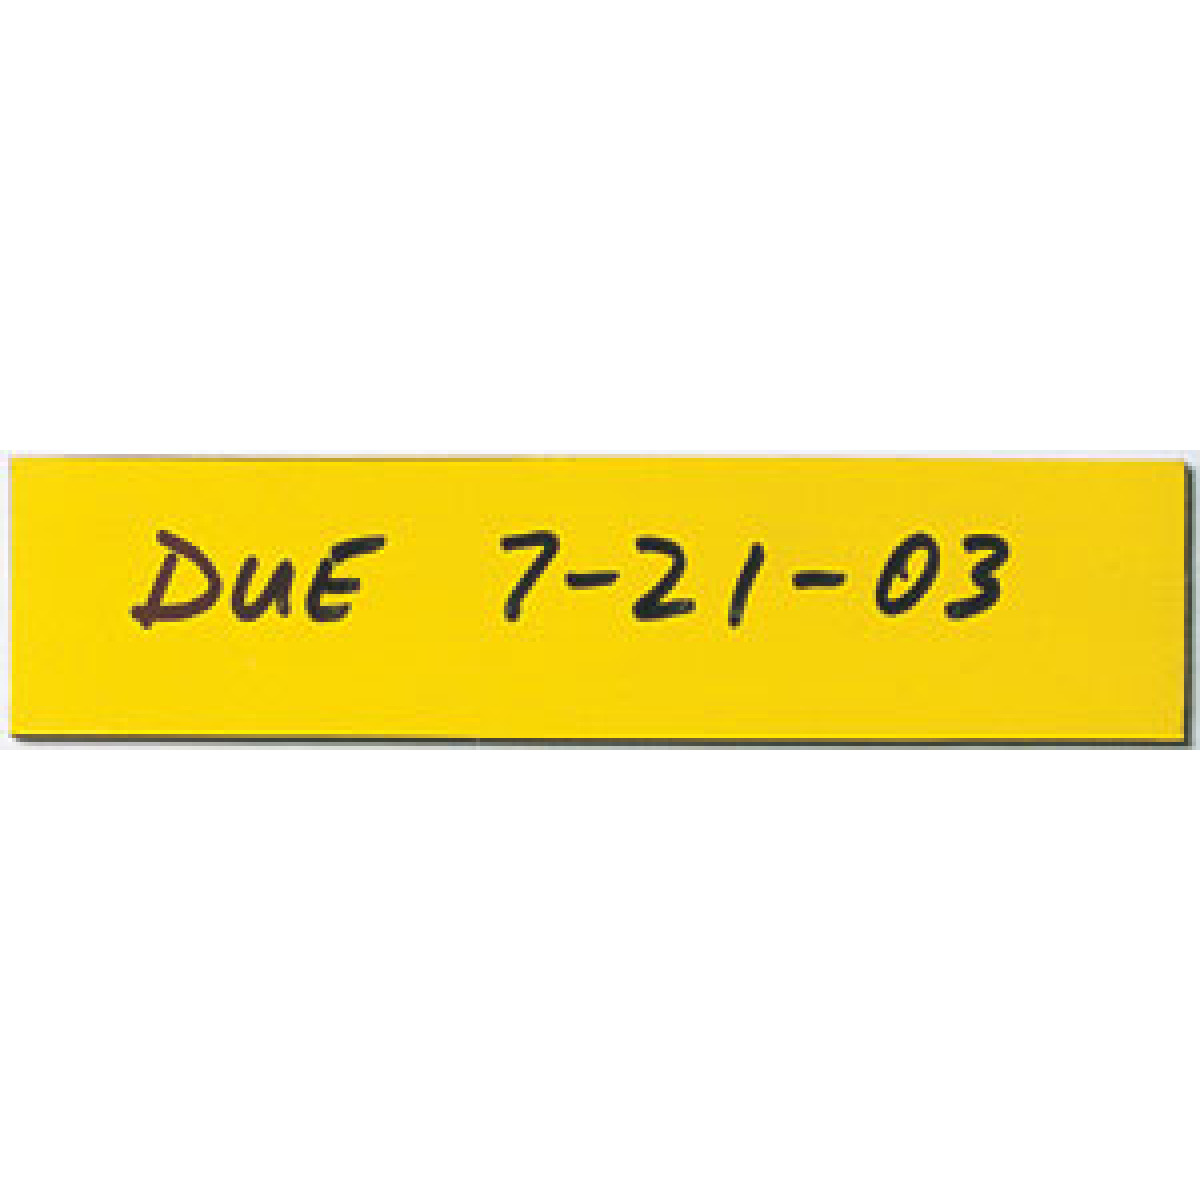 sample 1x4 inch write-on/wipe-off magnet